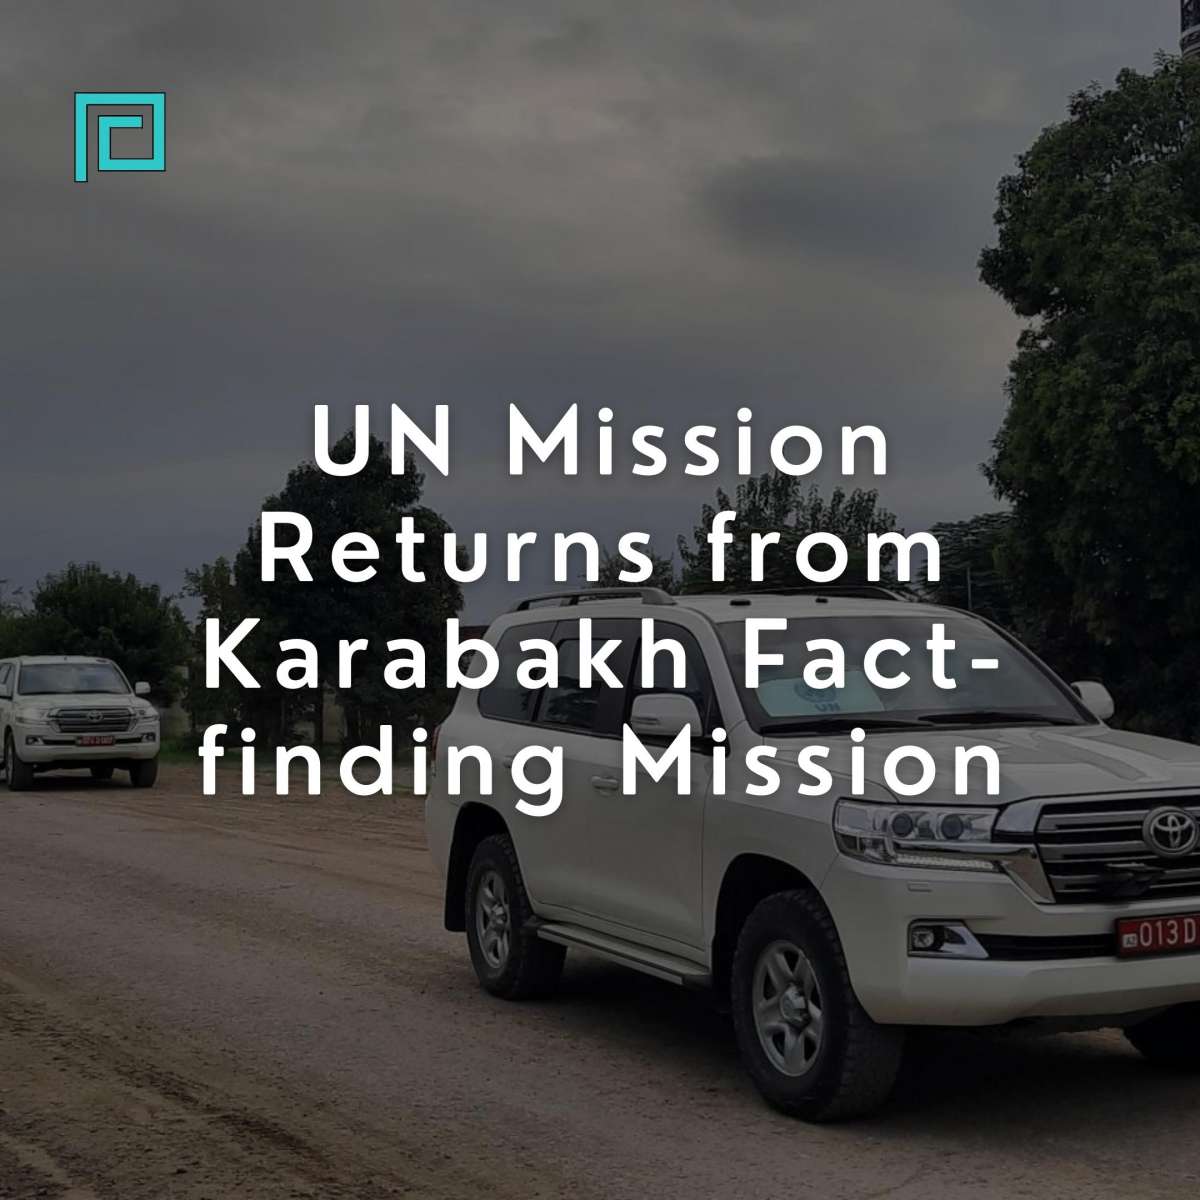 UN Mission Returns from Karabakh Fact-finding Mission